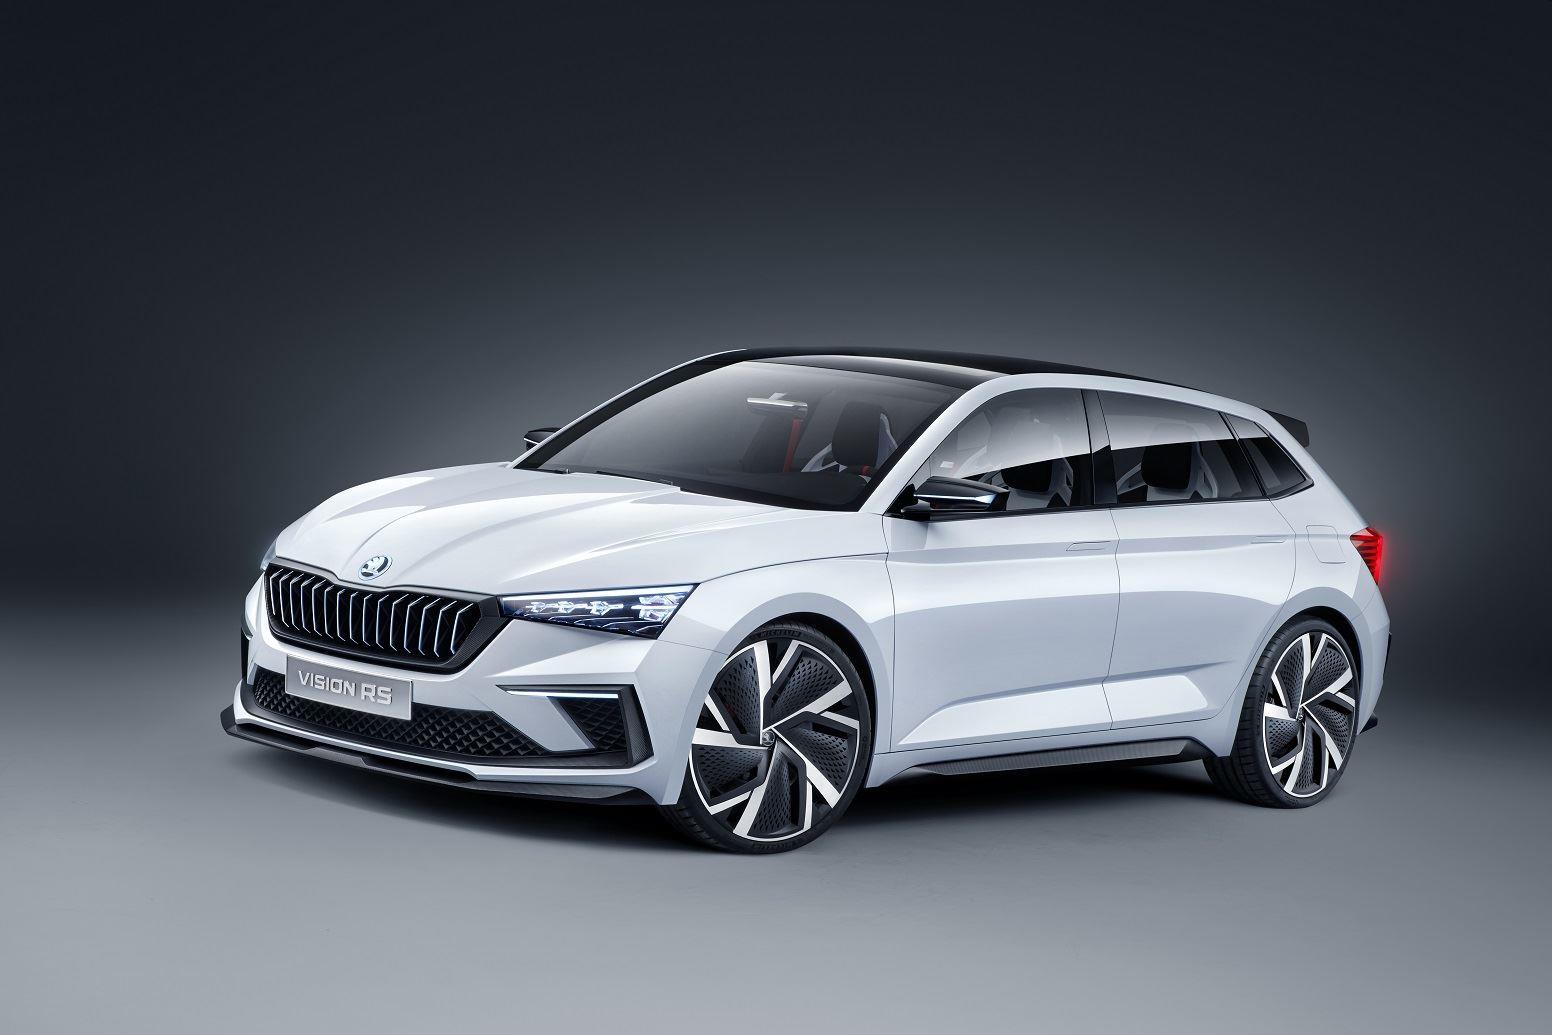 2019 Skoda Vision Rs News And Information Research And Pricing